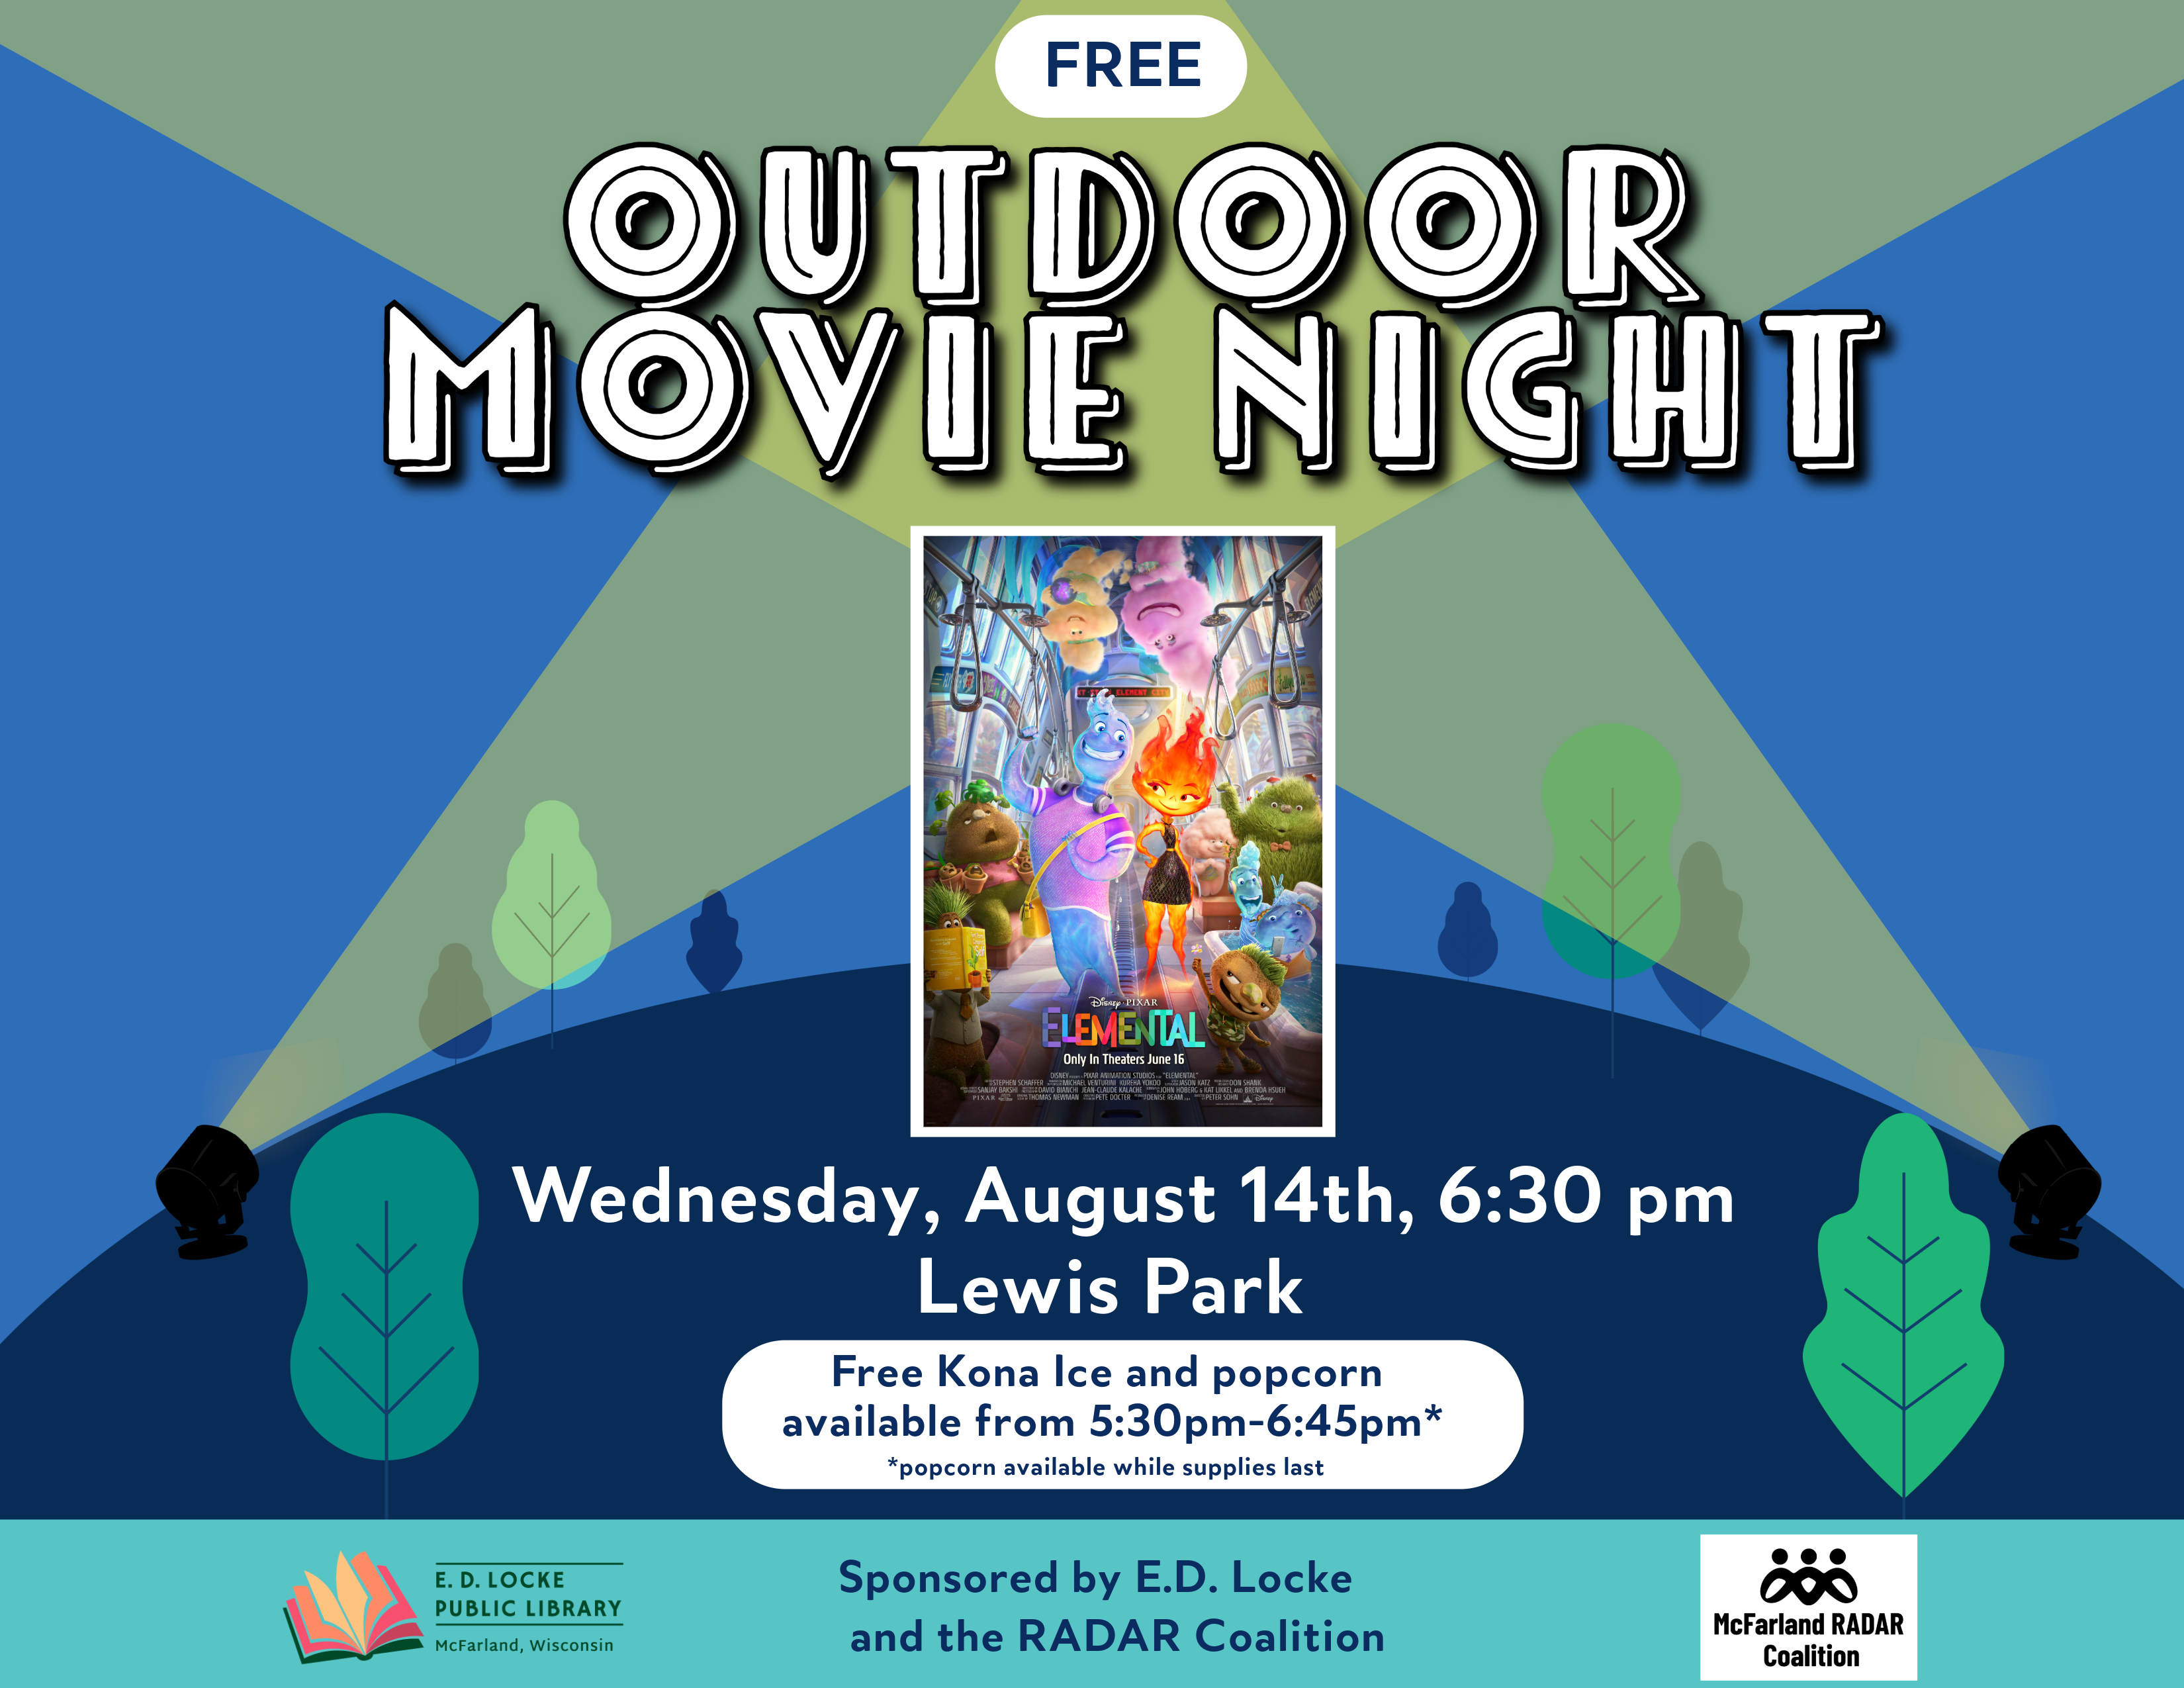 Flyer for the Outdoor Movie Night on Wednesday, August 14th, 6:30 pm at Lewis Park. Free Kona Ice and popcorn available from 5:30-6:45.